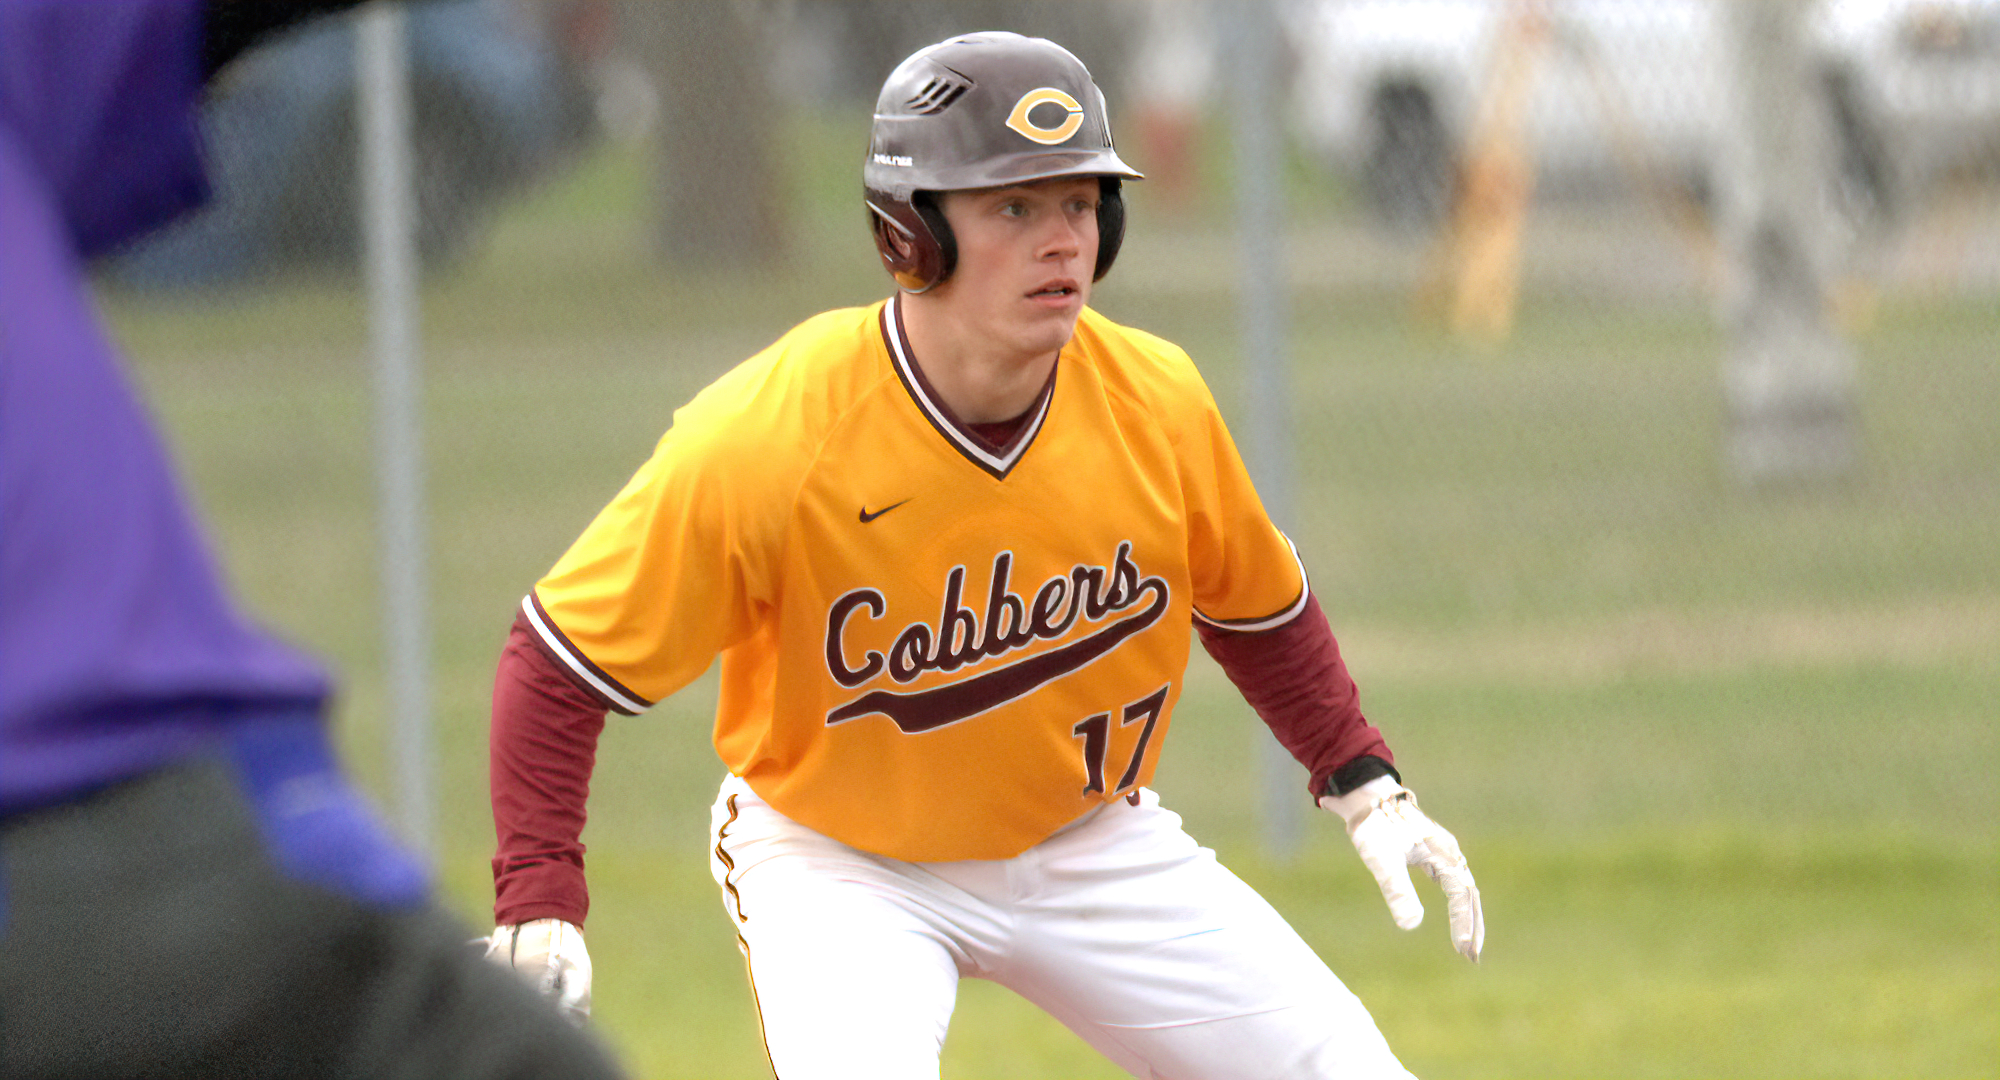 Andy Gravdahl had a 3-run triple in the fifth inning of Game 1 in CC's doubleheader at SJU which gave him the school record for triples in a career.